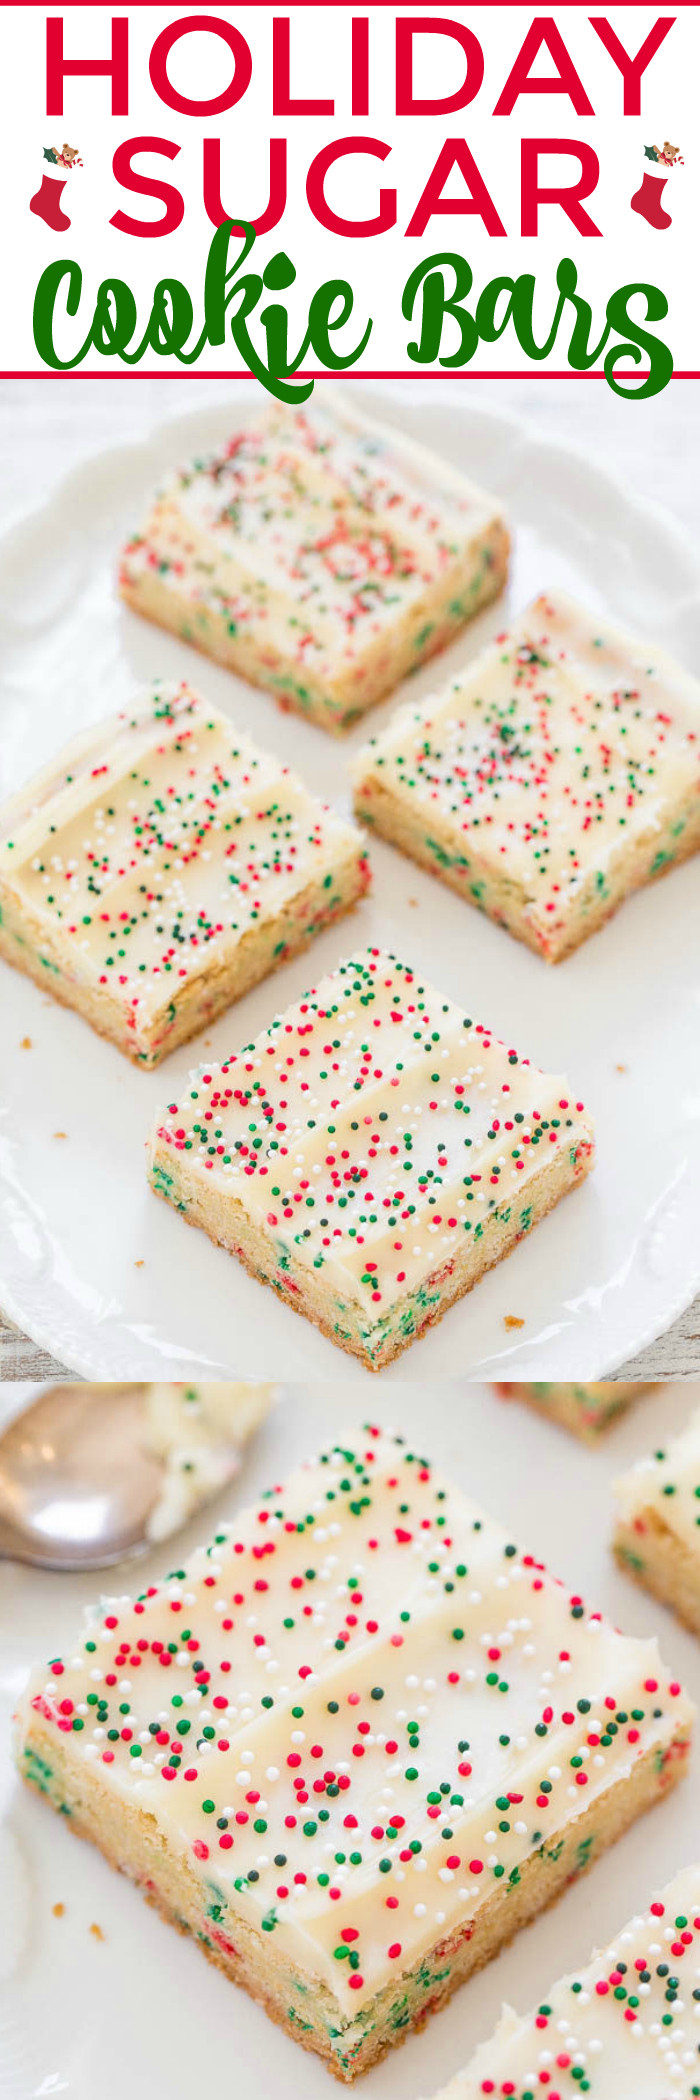 Holiday Sugar Cookies
 Holiday Sugar Cookie Bars with Cream Cheese Frosting